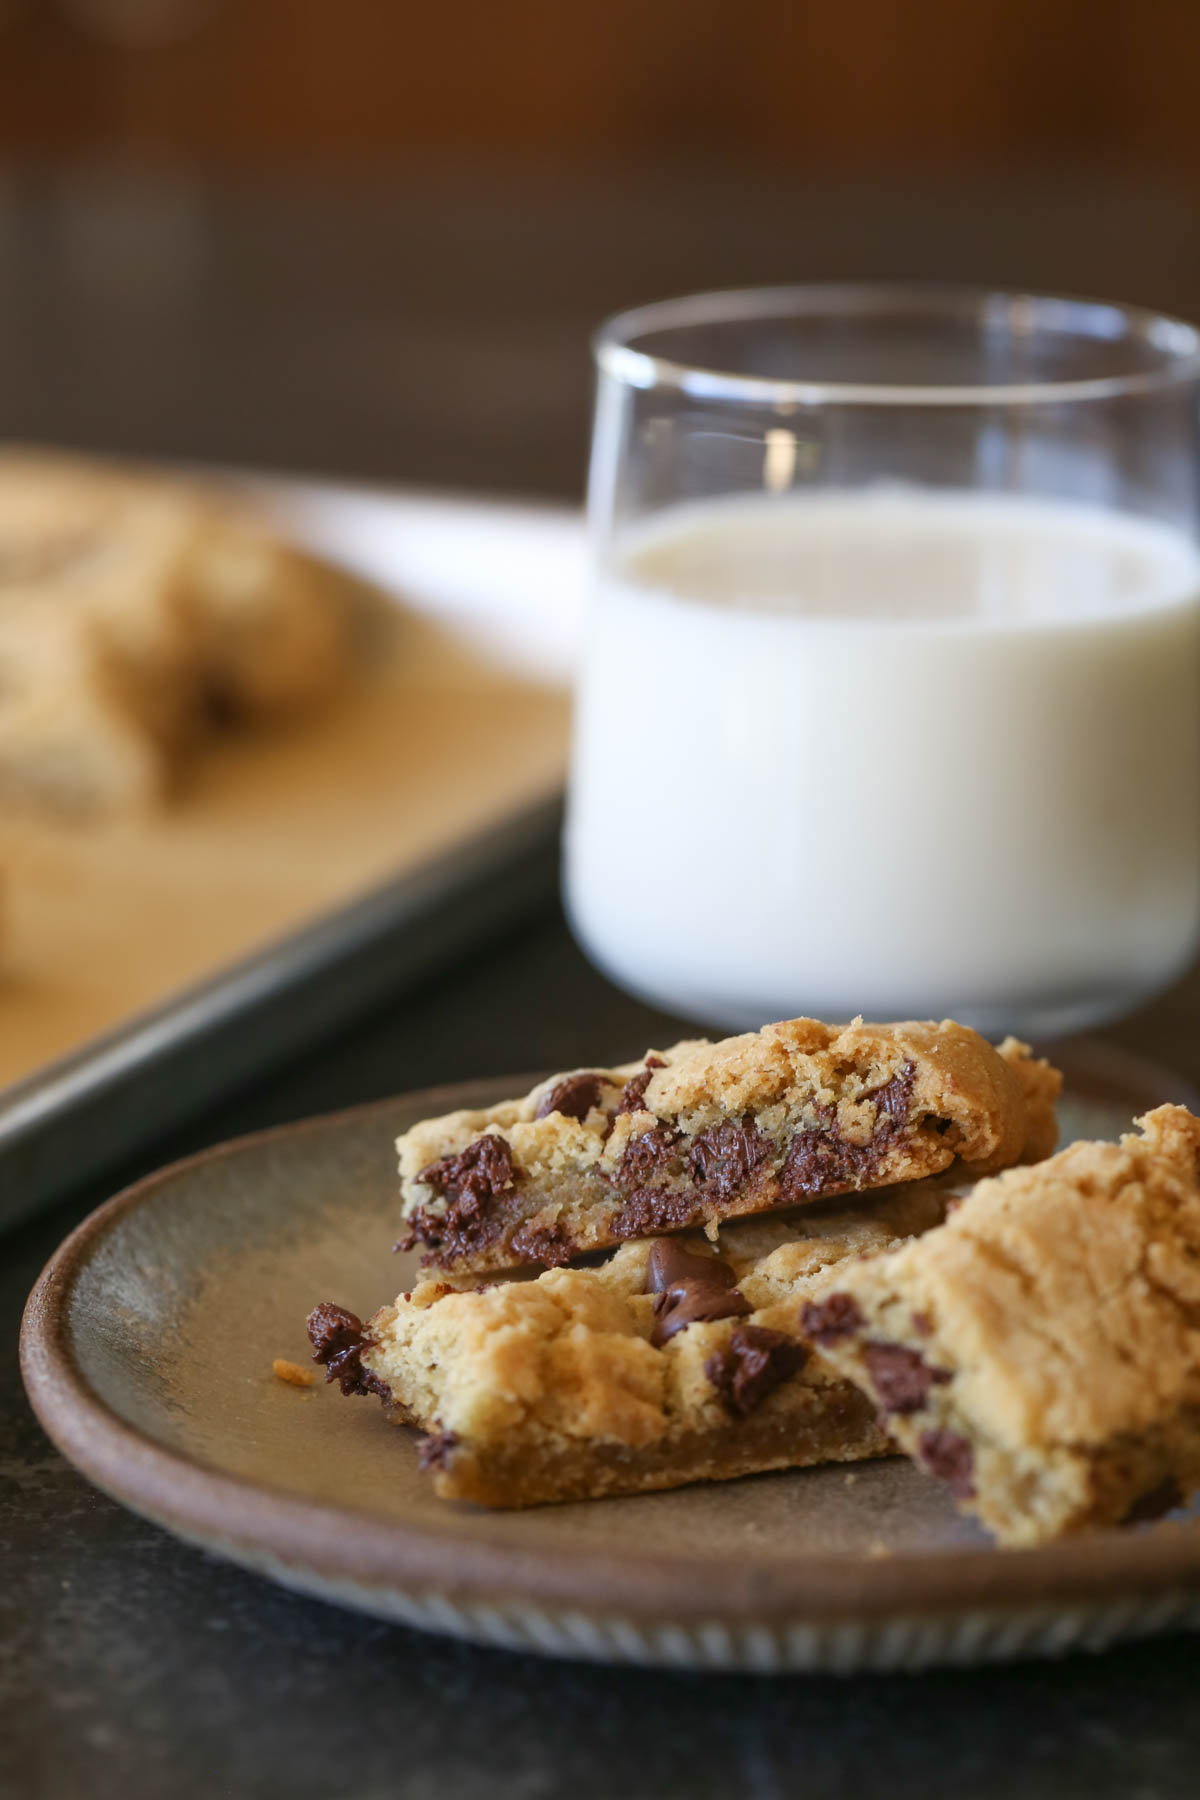 Close up shot of Chocolate Chip Cookie Sticks on a plate, with a glass of milk in the background along with the baking pan of more Chocolate Chip Cookie Sticks. 